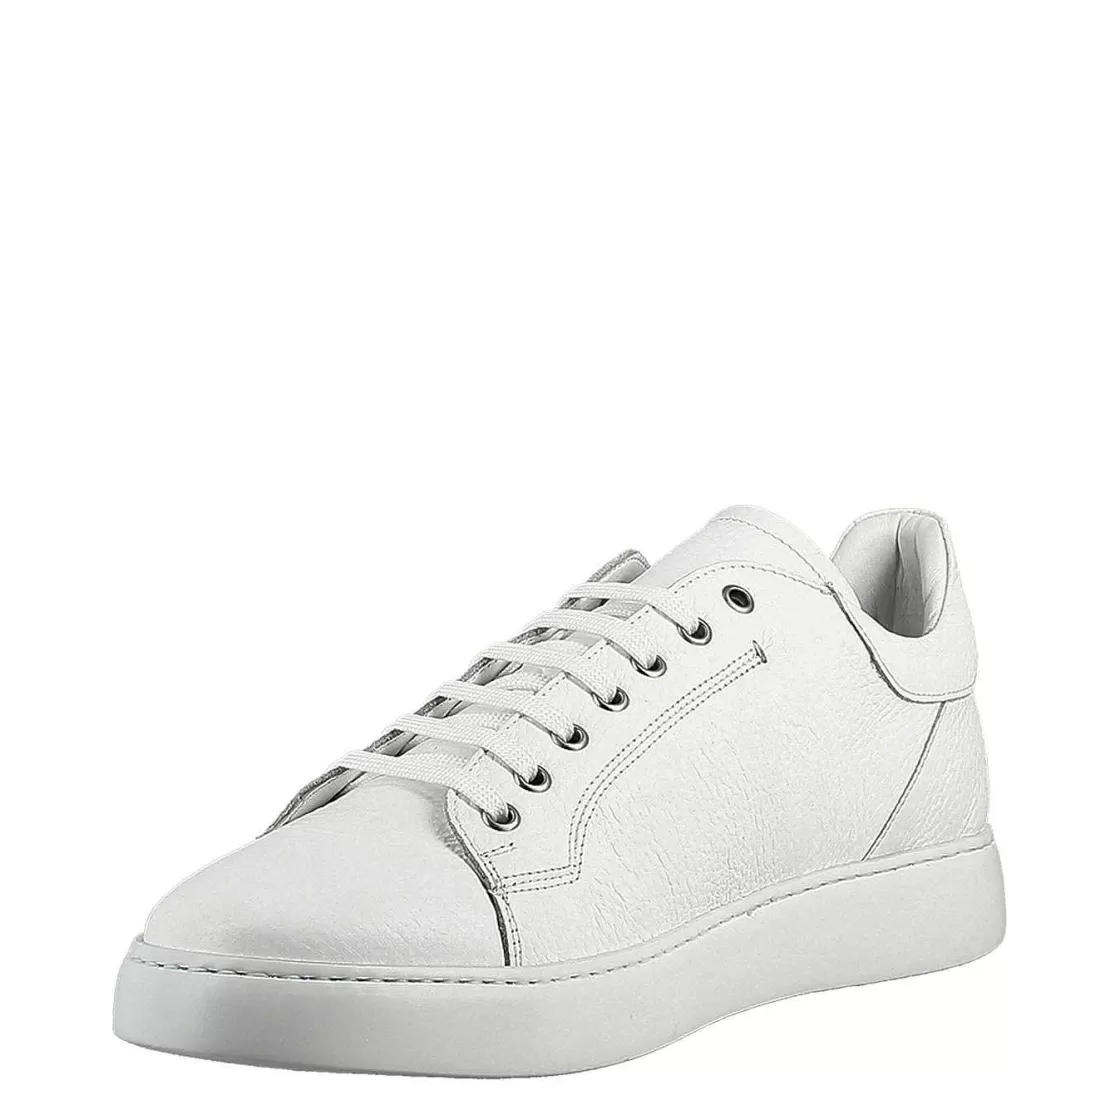 Leonardo Men'S Handmade Lace-Up Casual Shoes In White Leather Clearance